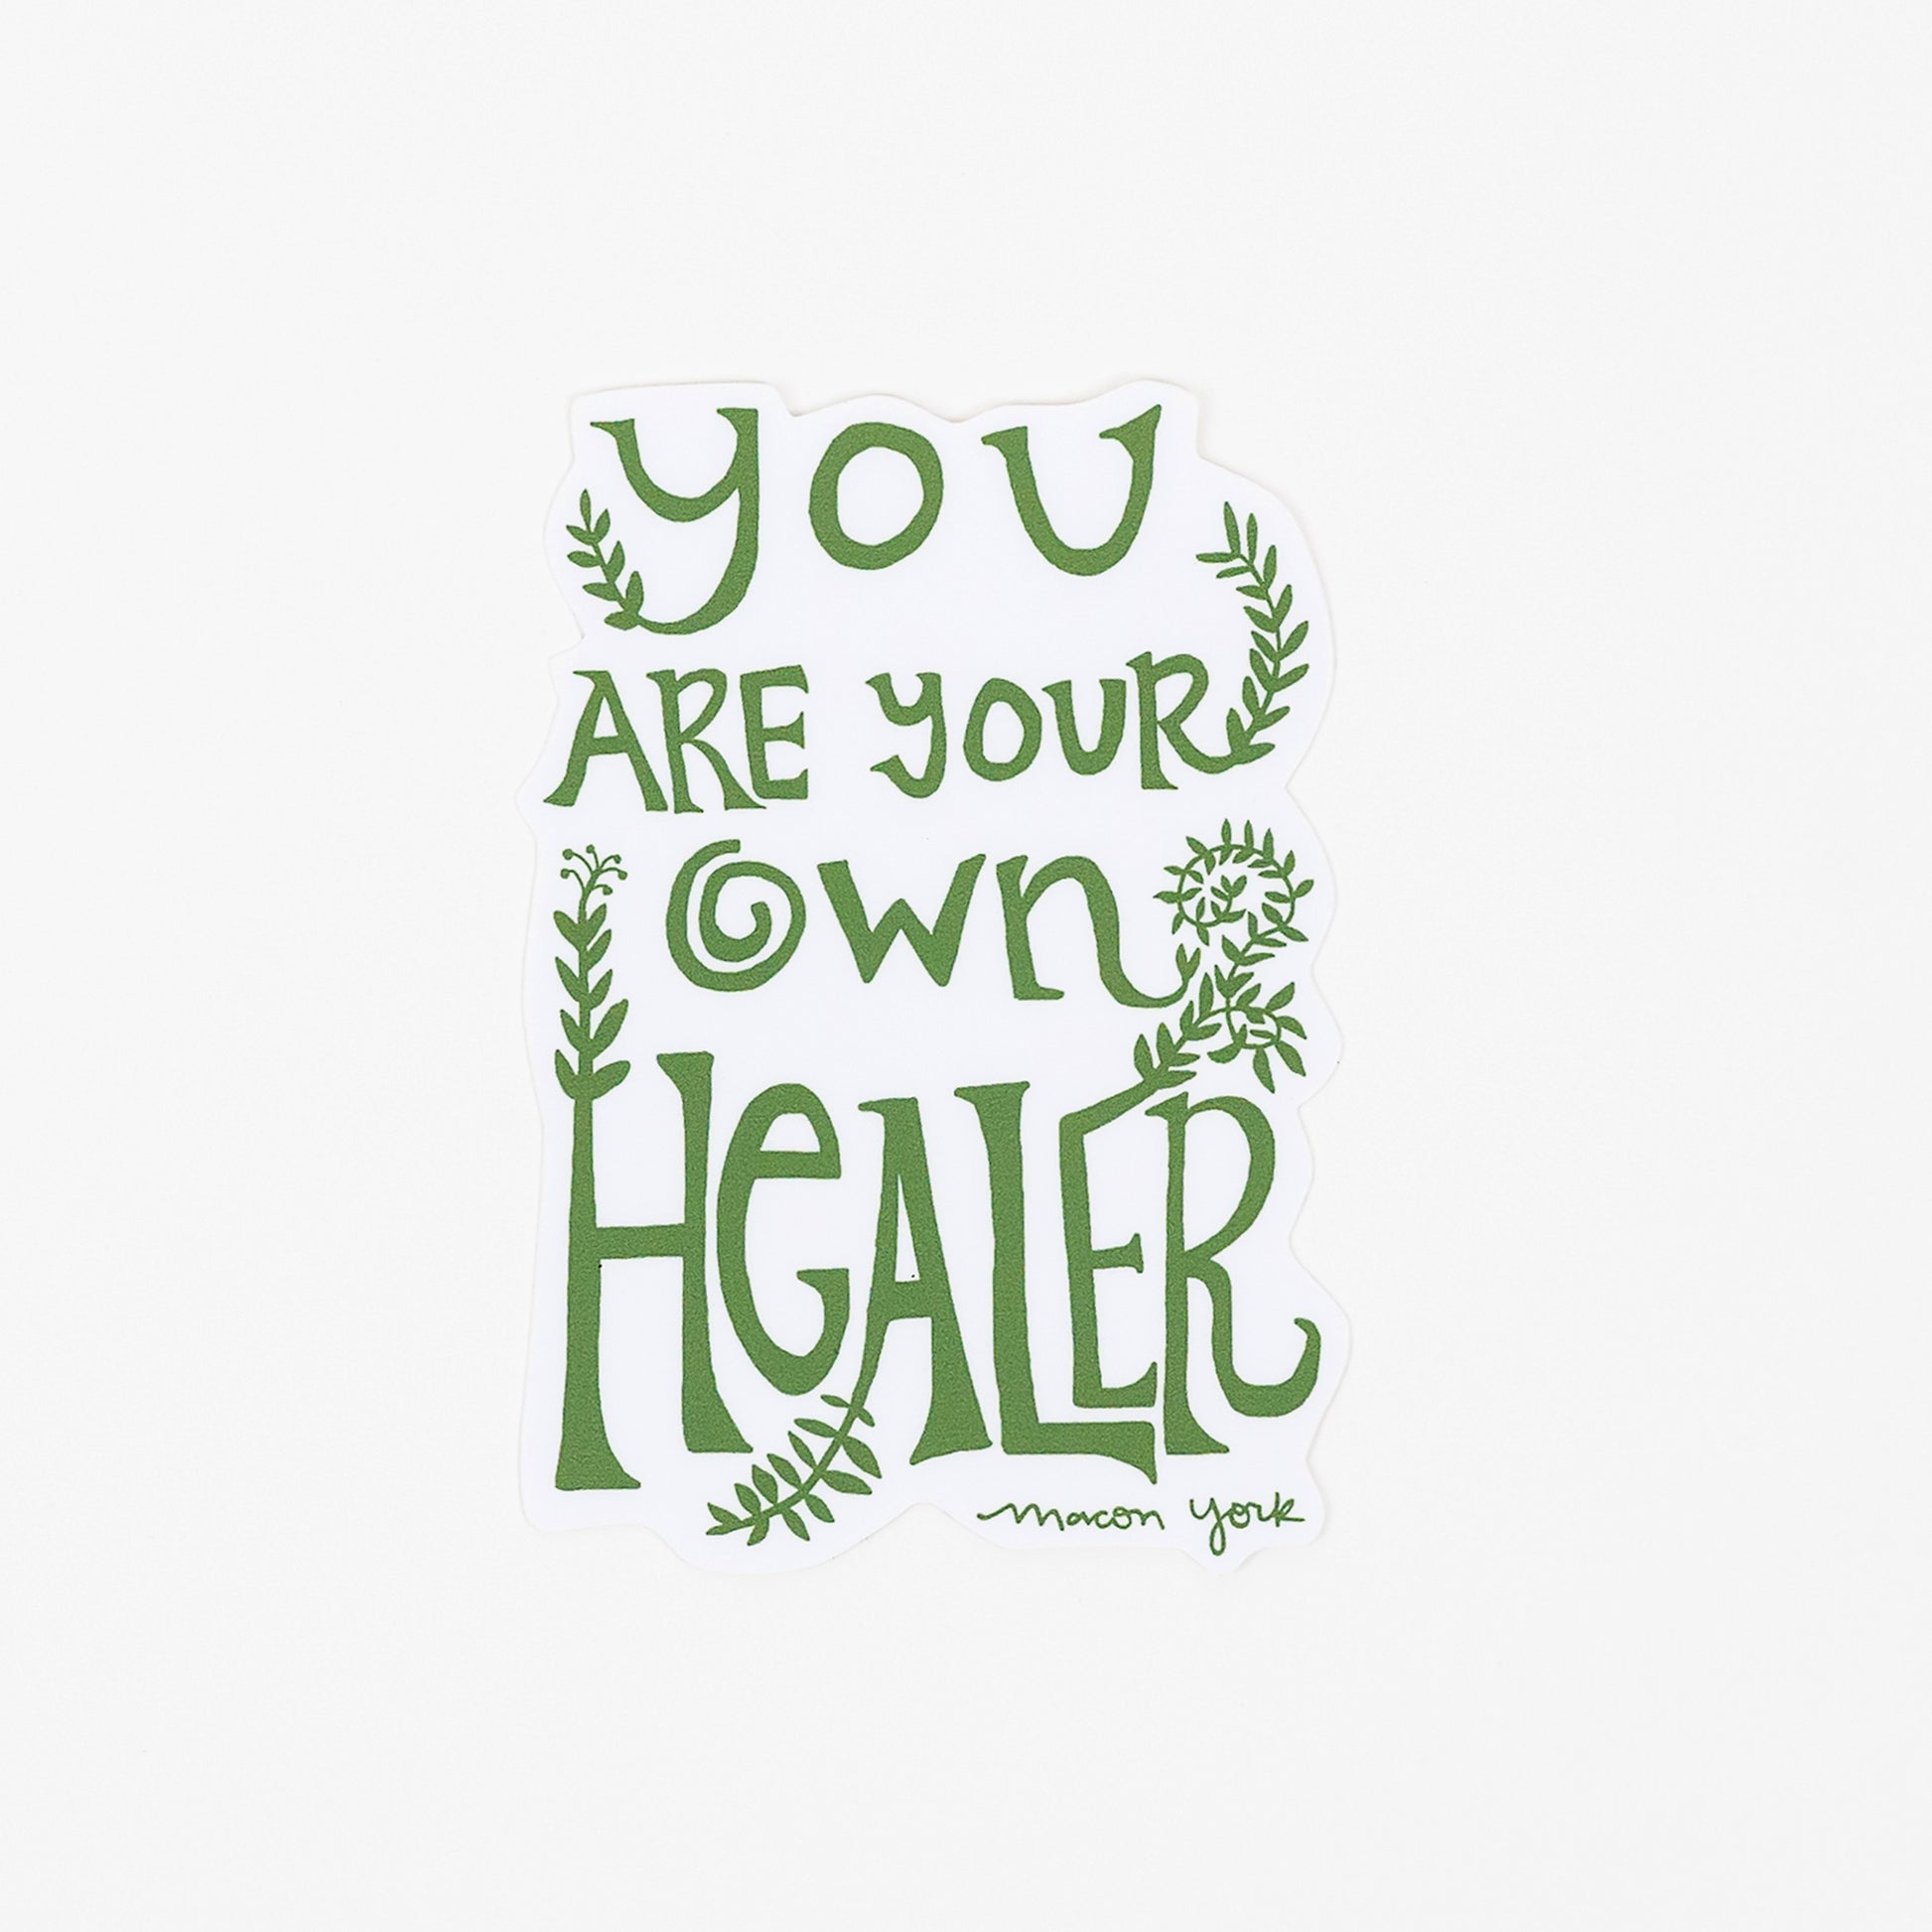 High quality vinyl sticker featuring original hand-drawn typography by Macon York that reads "you are your own hearler" in a funky, earthy, 70s style. 3" x 4". 